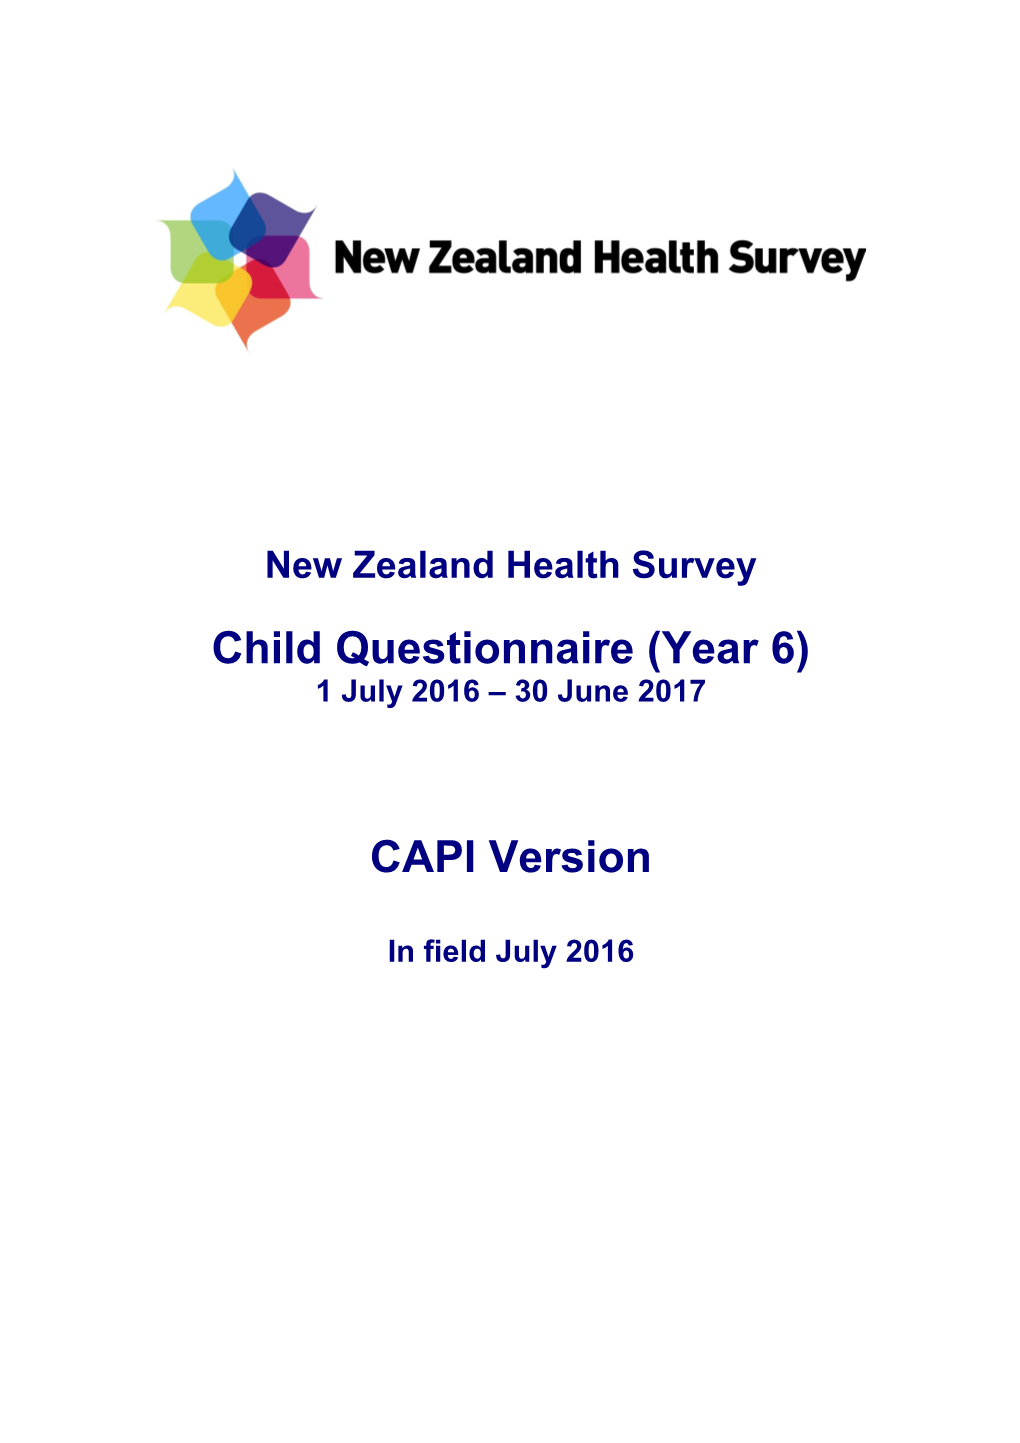 New Zealand Health Survey: Child Questionnaire (Year 6) 1 July 2016 30 June 2017